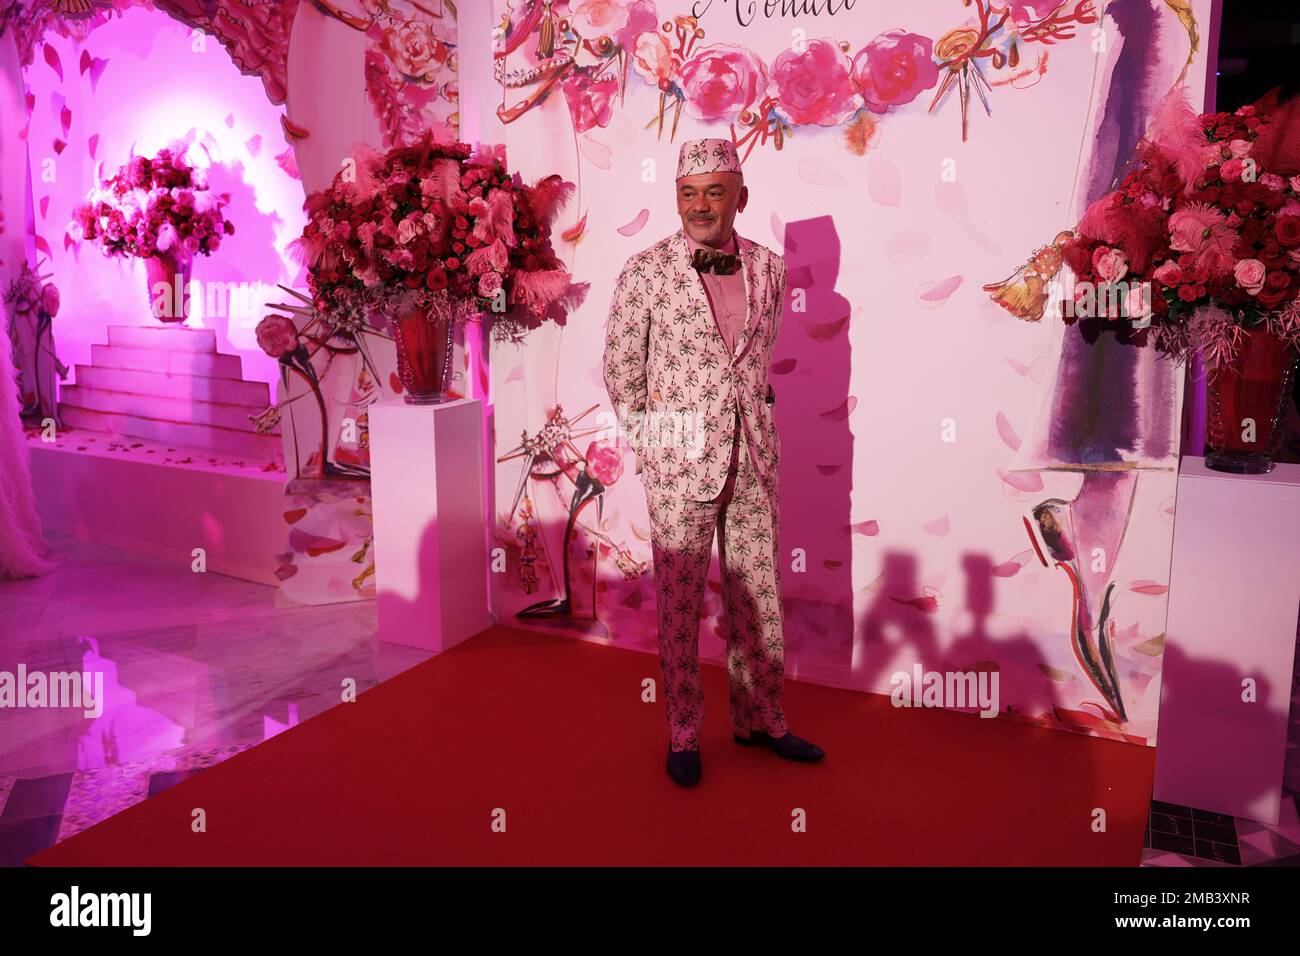 French footwear designer Christian Louboutin poses on the red carpet for an  opening event for the exhibition Louis Vuitton Series 2 - Past, Present a  Stock Photo - Alamy